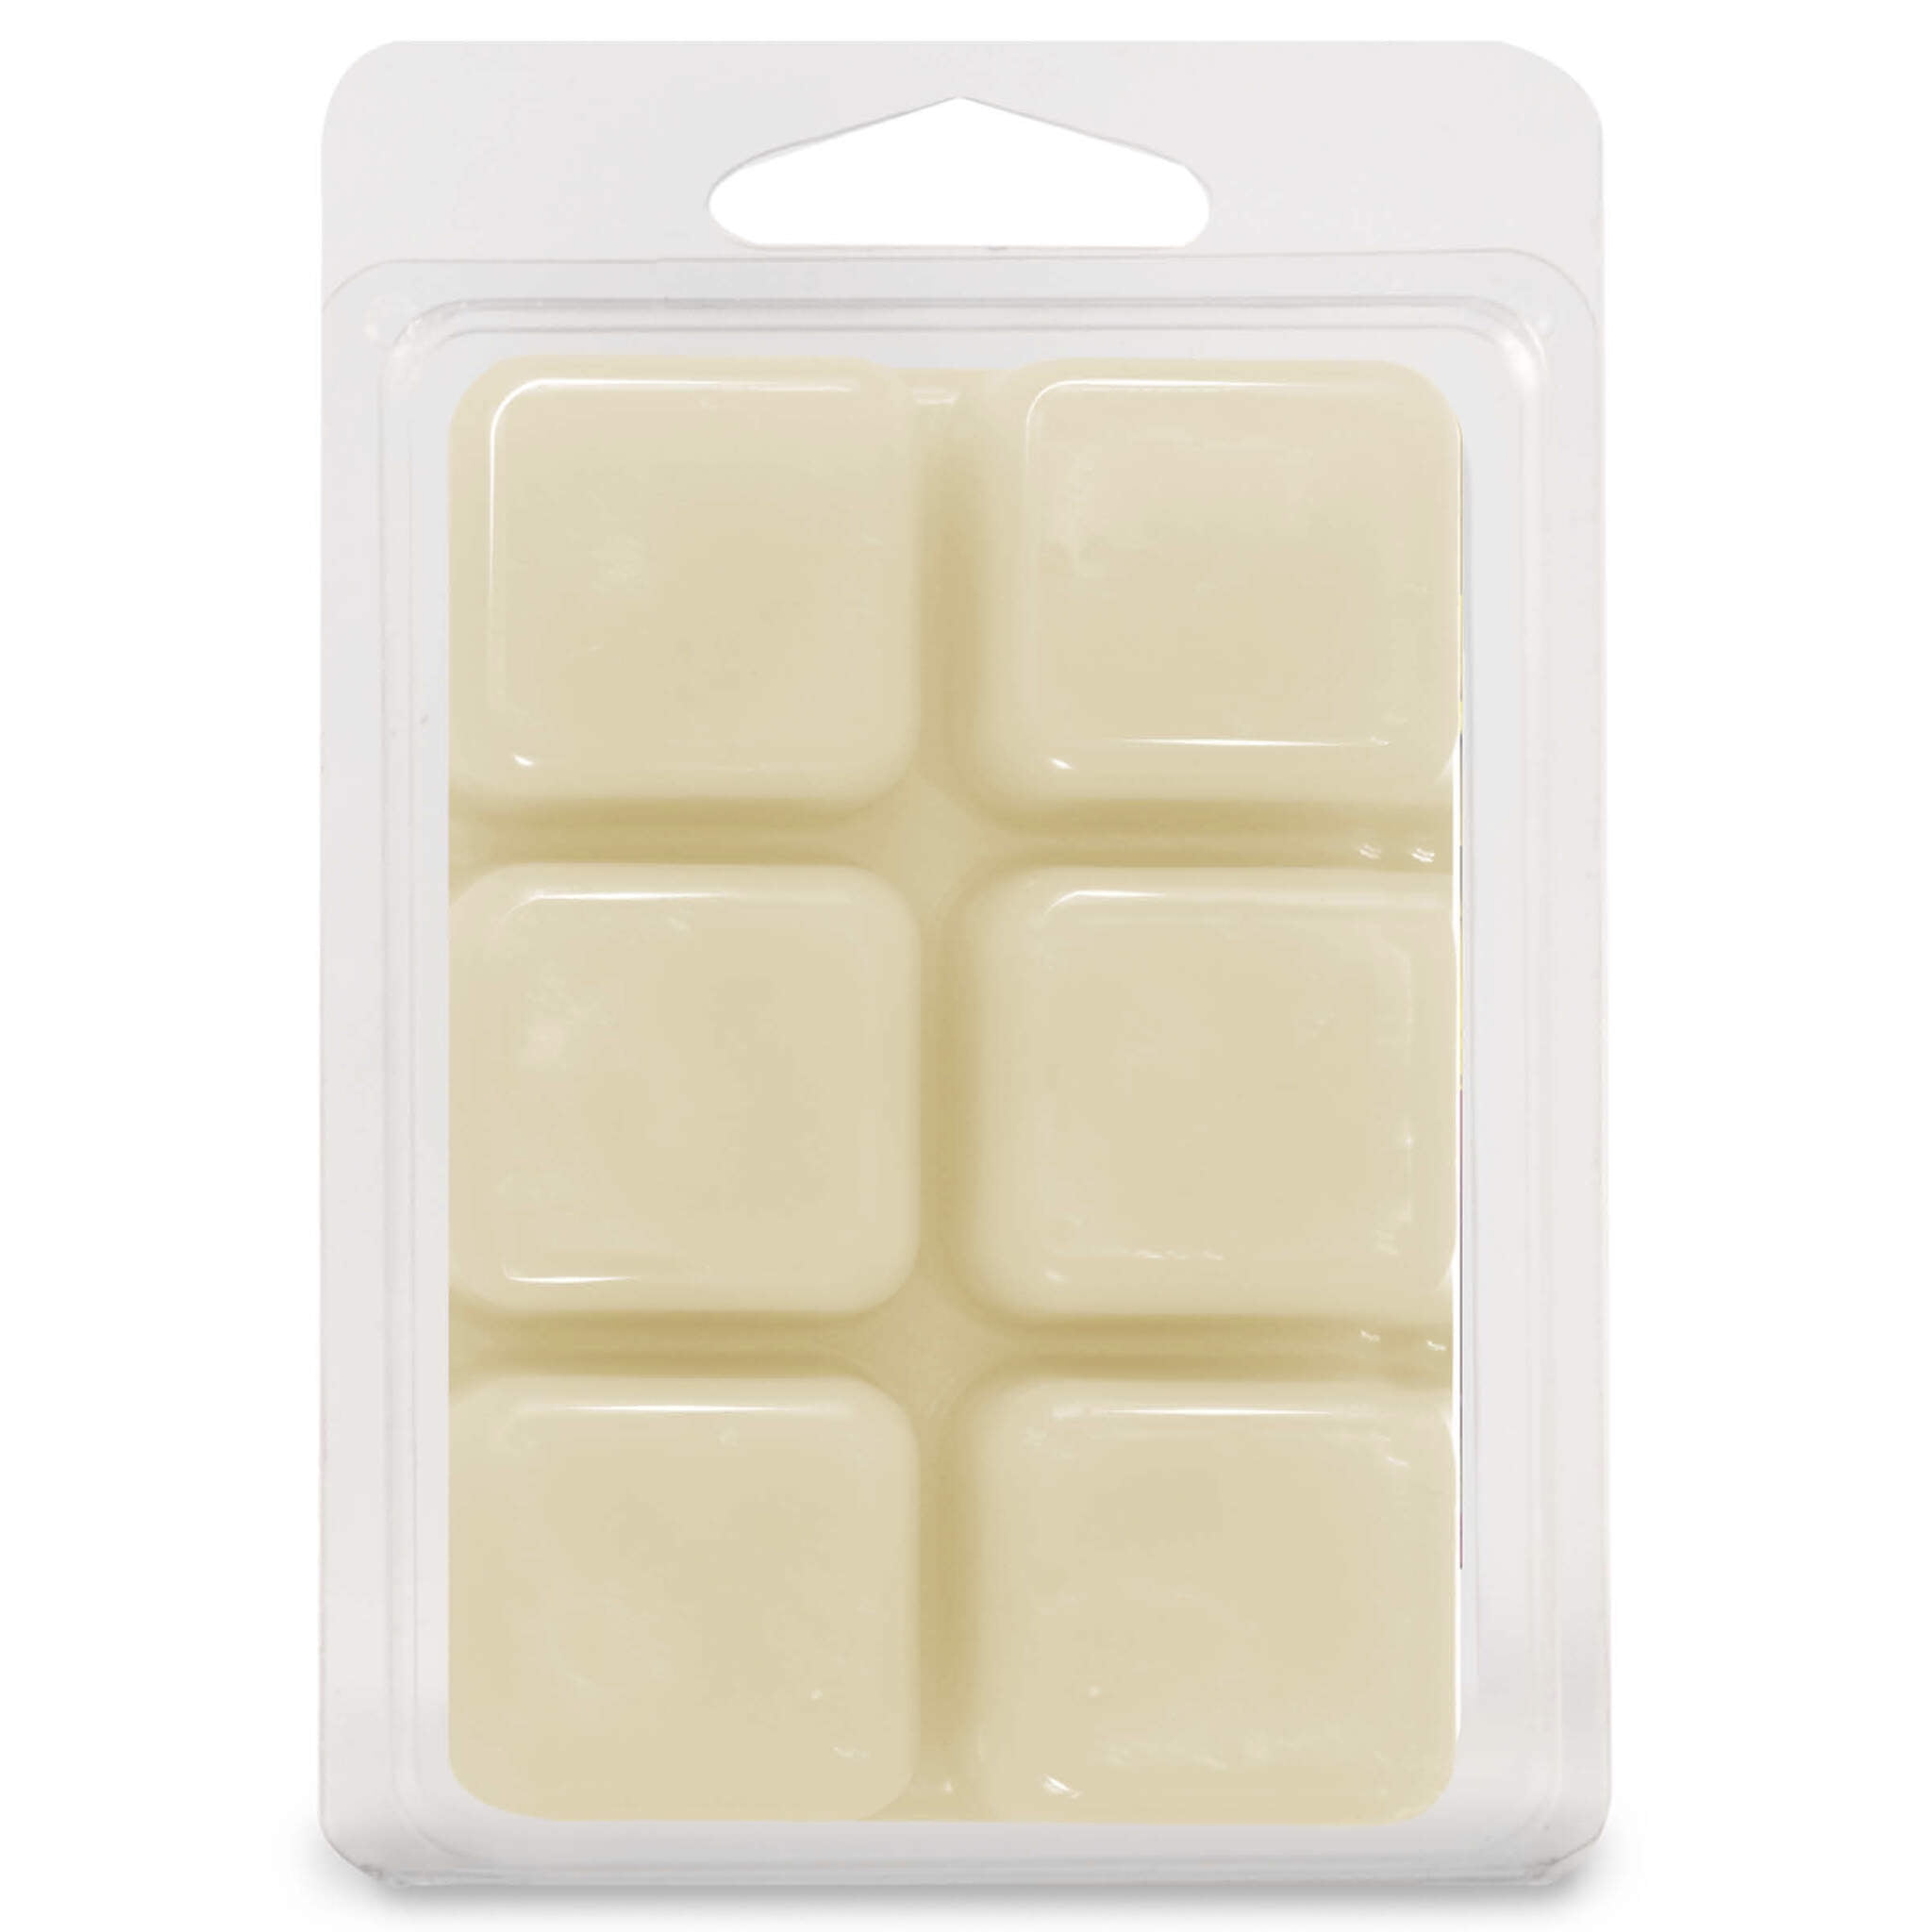 Bakery Pack Wax Warmer Melts - Variety Mix 5 Pack - 1 Pound of Wax - 100%  Plant-Based Soy American Made - Scented Wax Warmer Cubes. Vanilla Cupcake